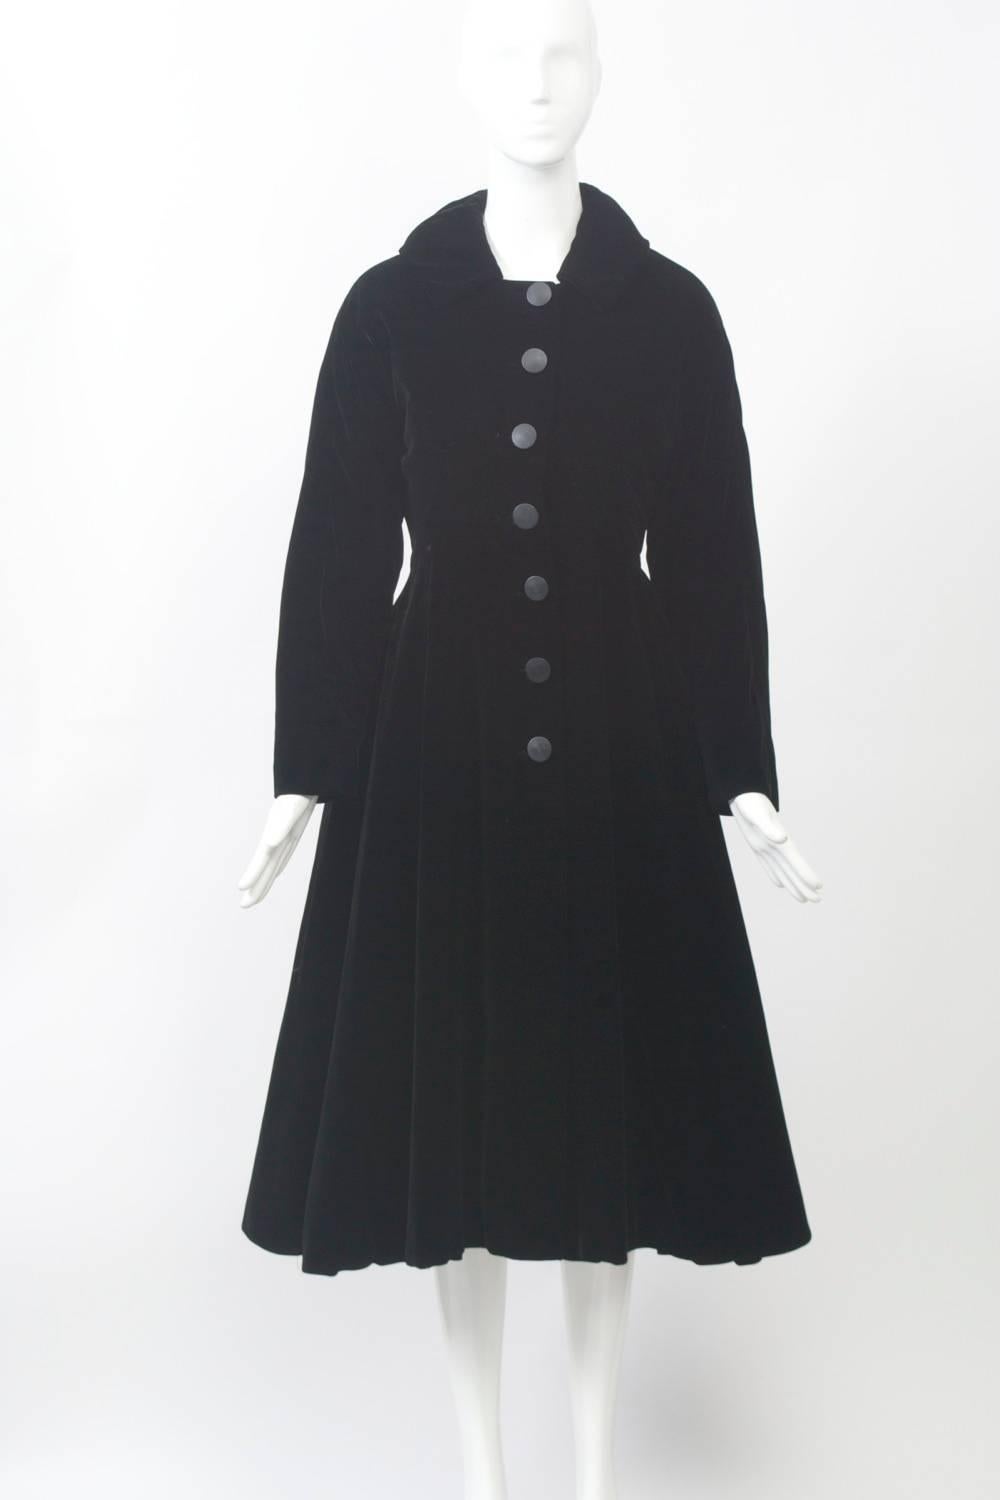 Velvet is in! This black velvet 1950s princess-style coat is in great condition and features a small collar and seven black buttons down the front. The nipped waist and flare skirt so popular during the early 1950s demonstrate the influence of the